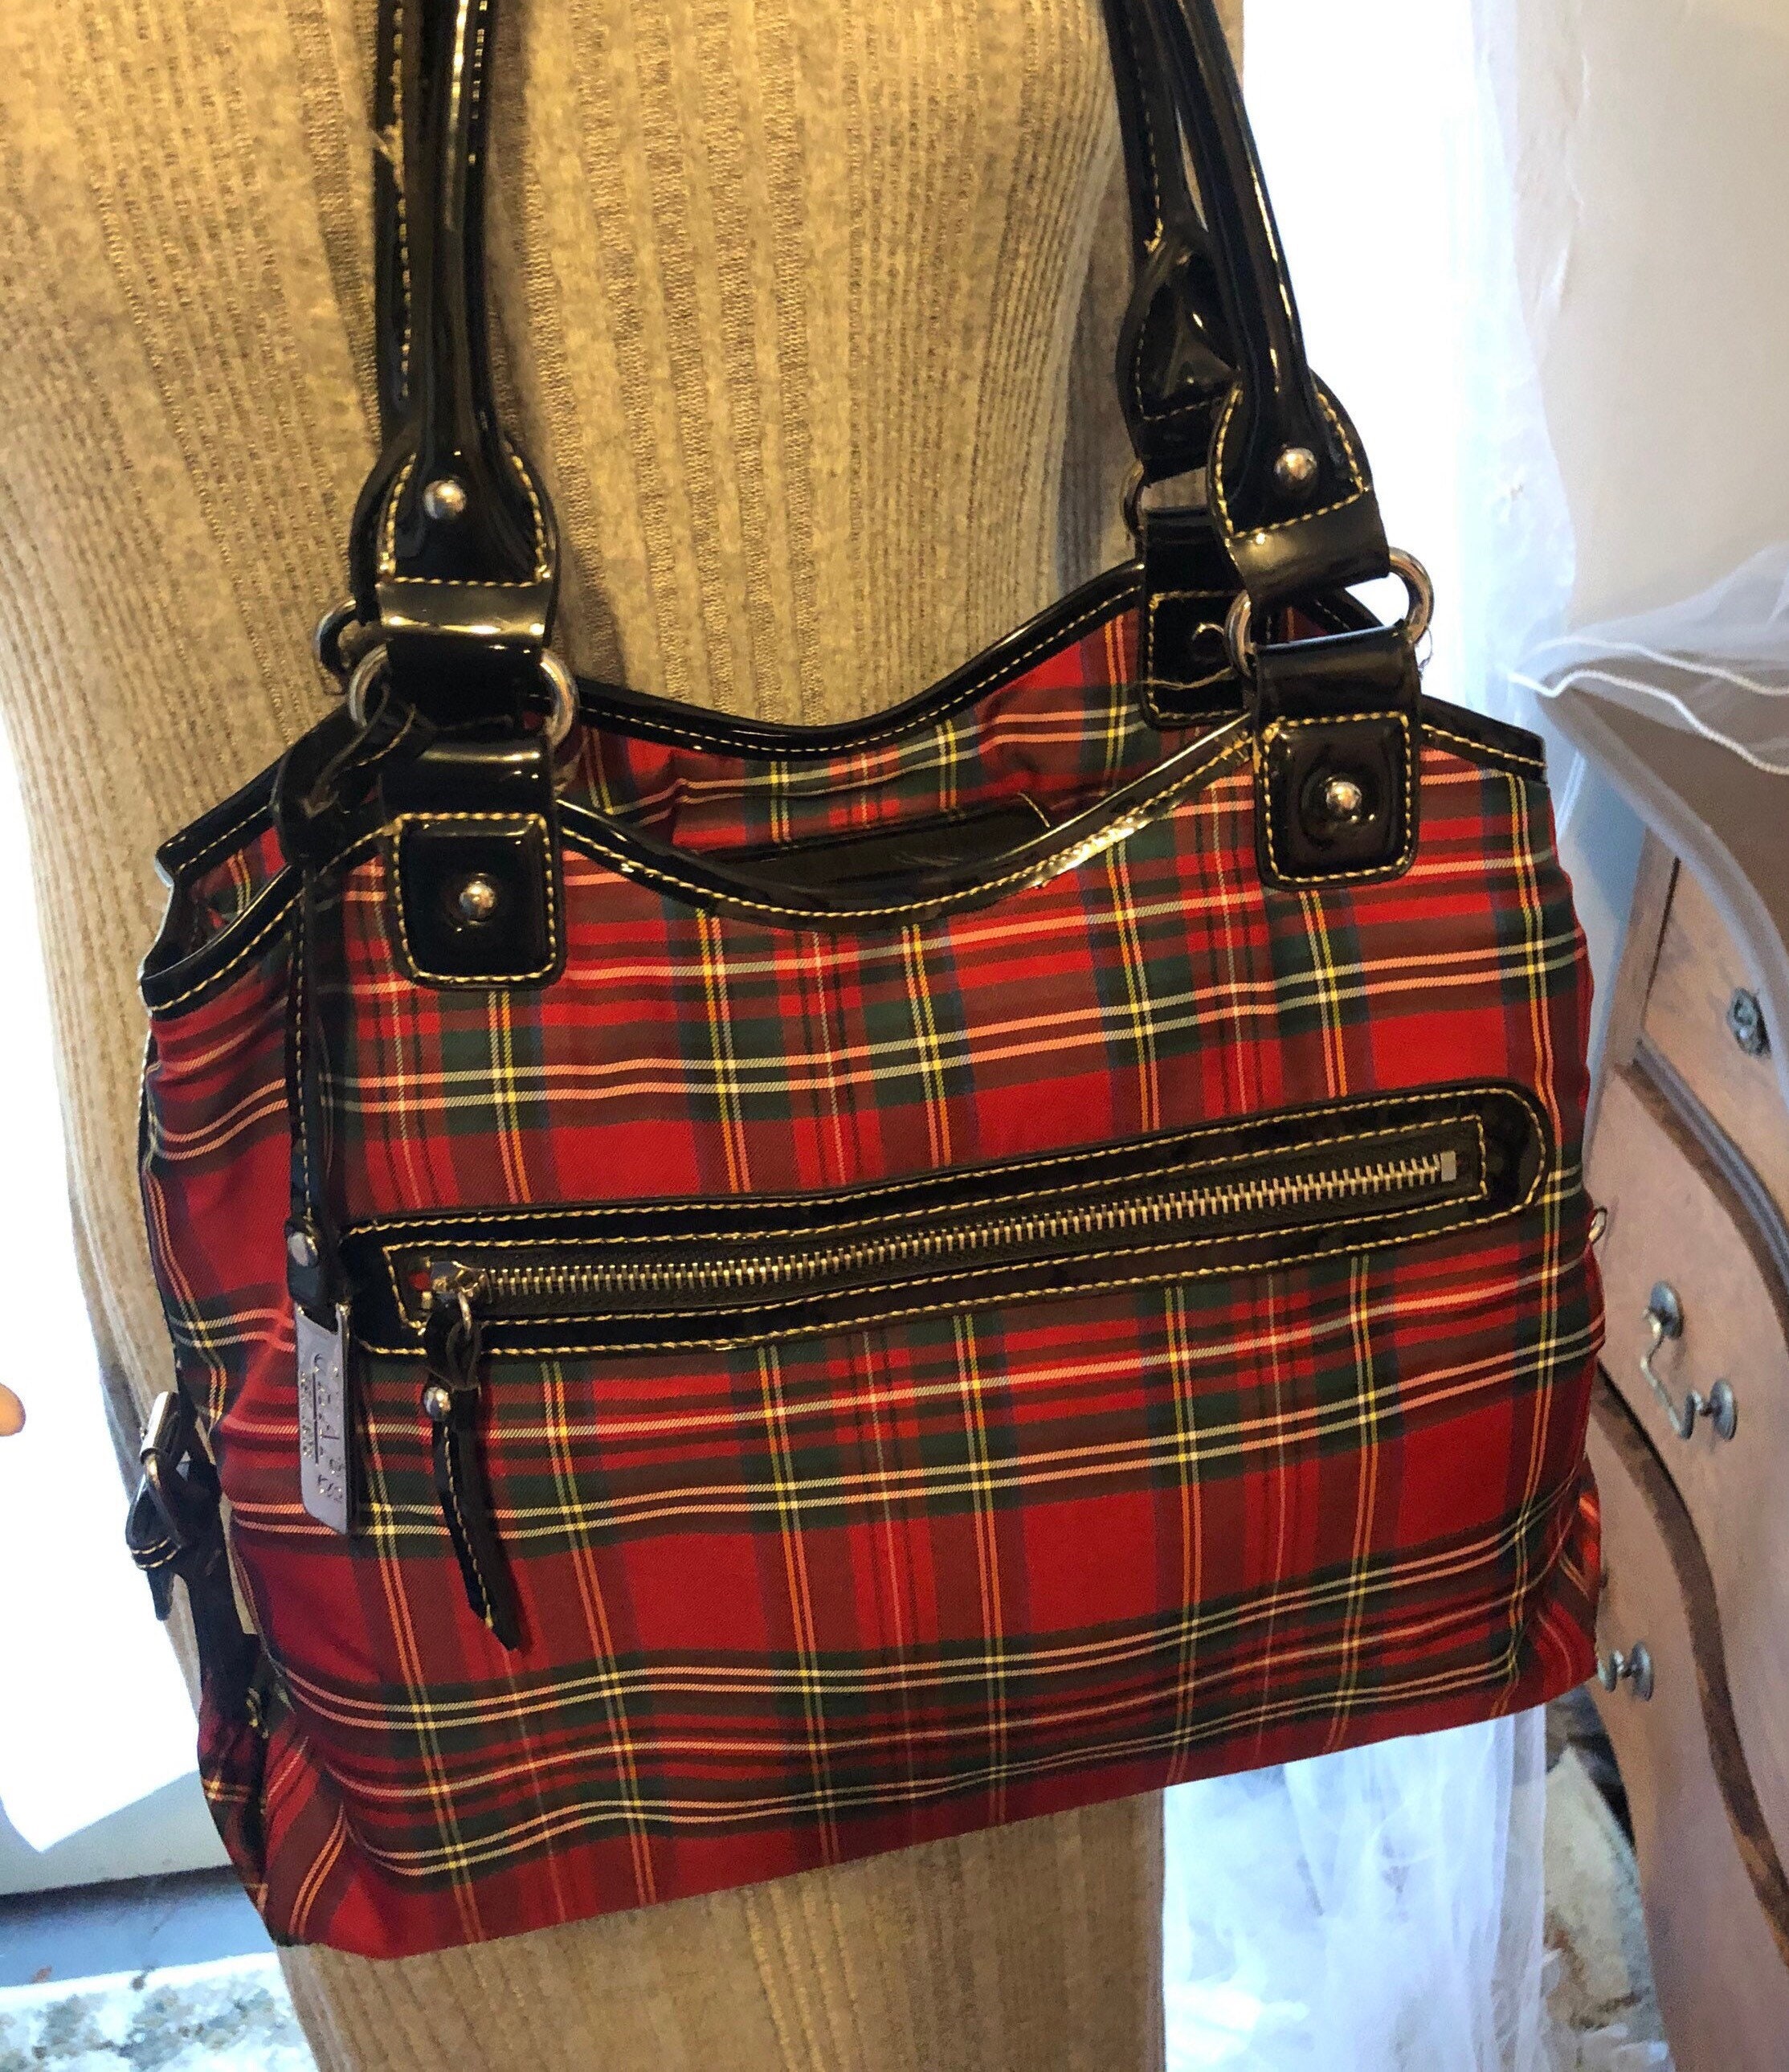 Shop The Tartan Collection - Bags at Prices You Love | ILoveDooney